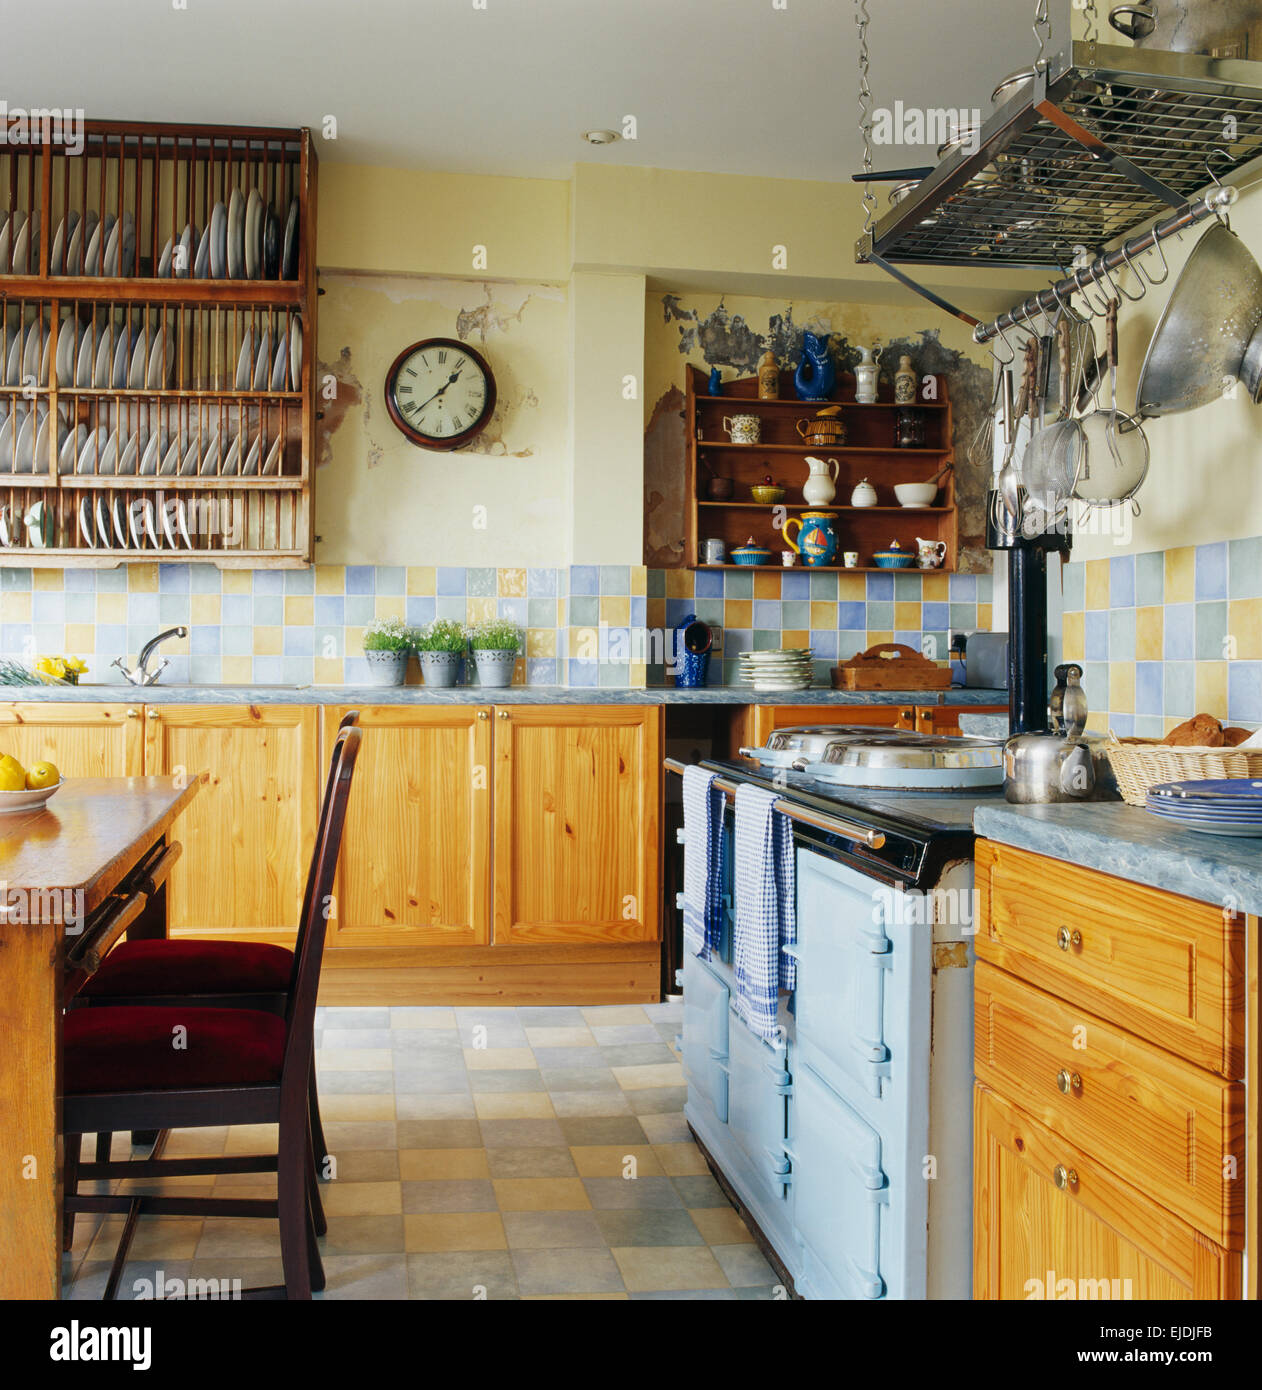 Pine units and pale blue Aga in traditional coastal kitchen with  blue+yellow tiling and a large pine plate rack Stock Photo - Alamy